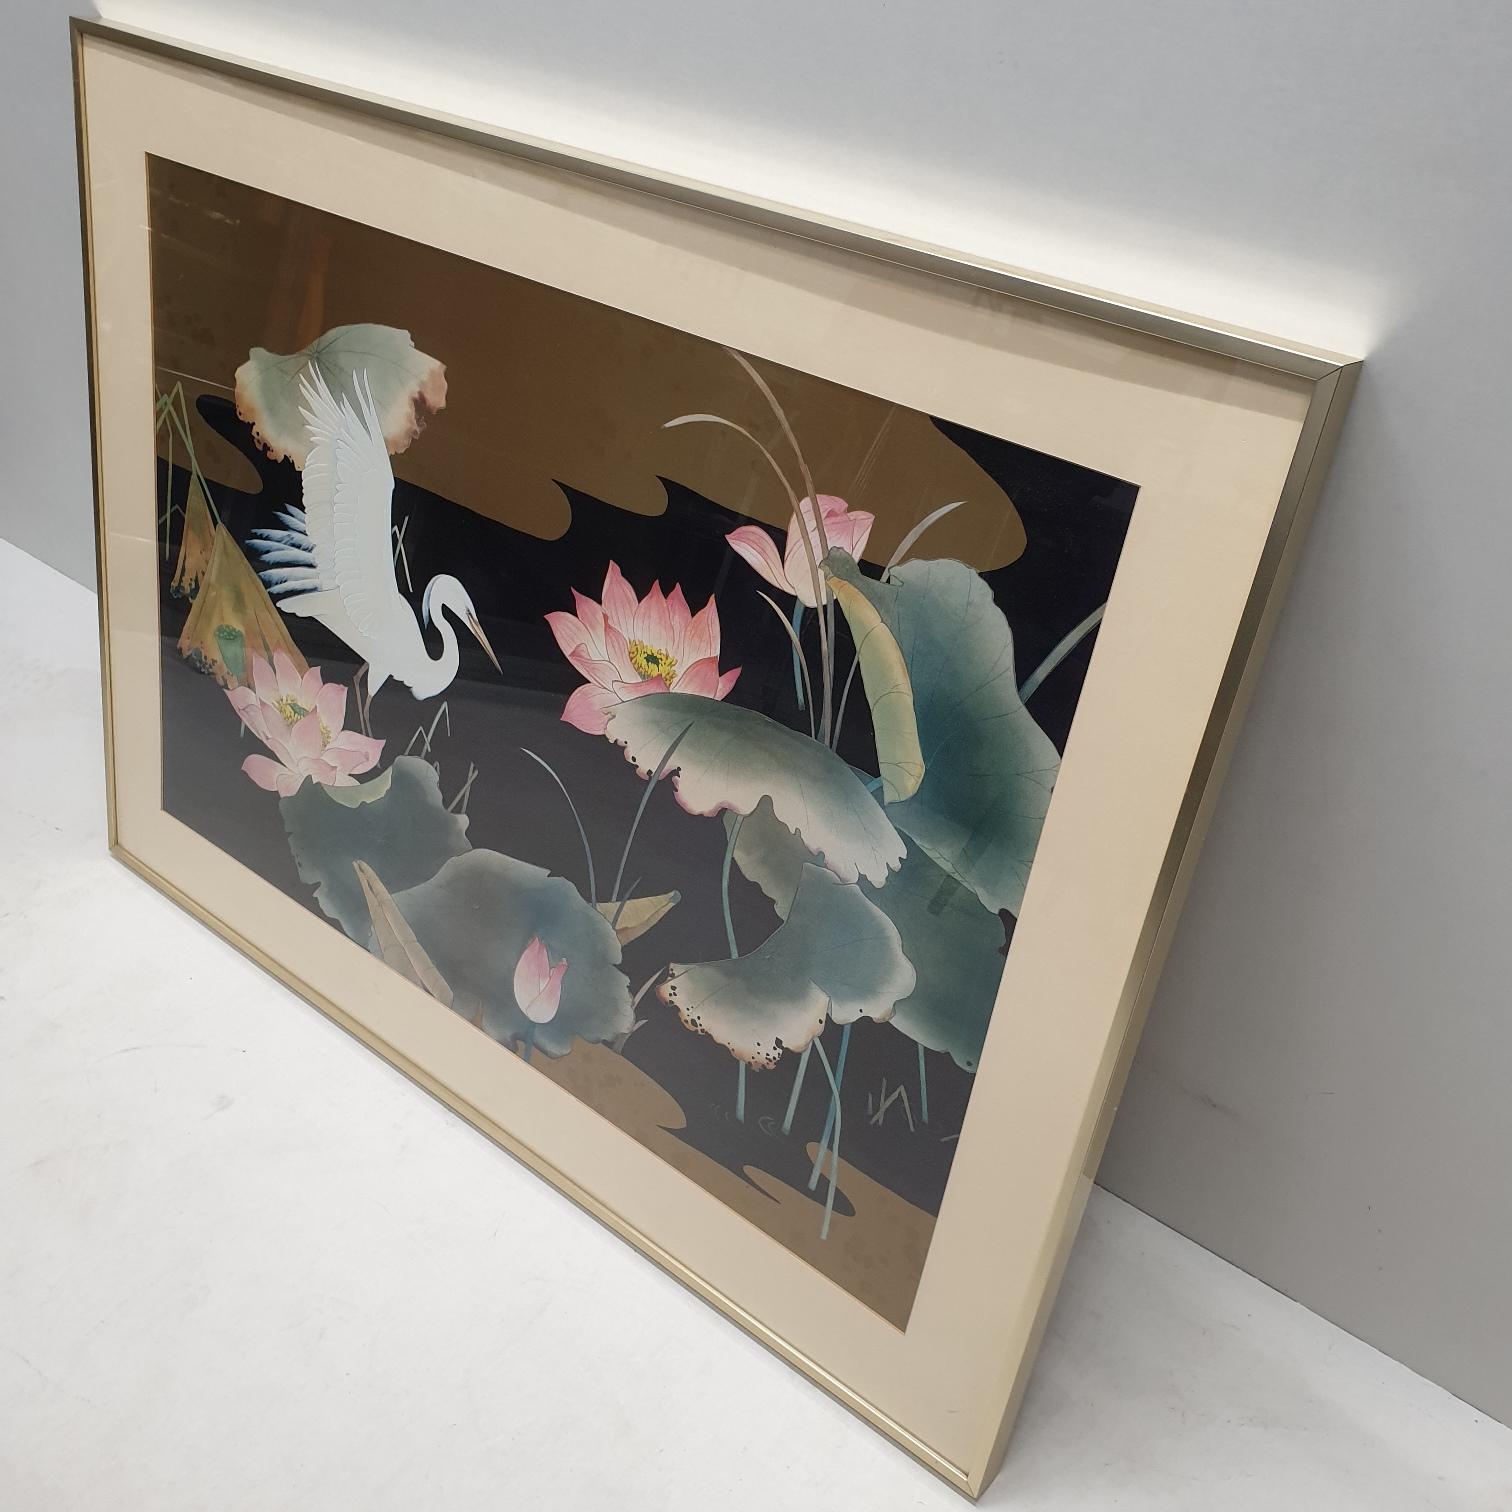 Watercolor painting from white heron with a brass frame and passe-partout, 1980s.
Not signed.
Japanese art.